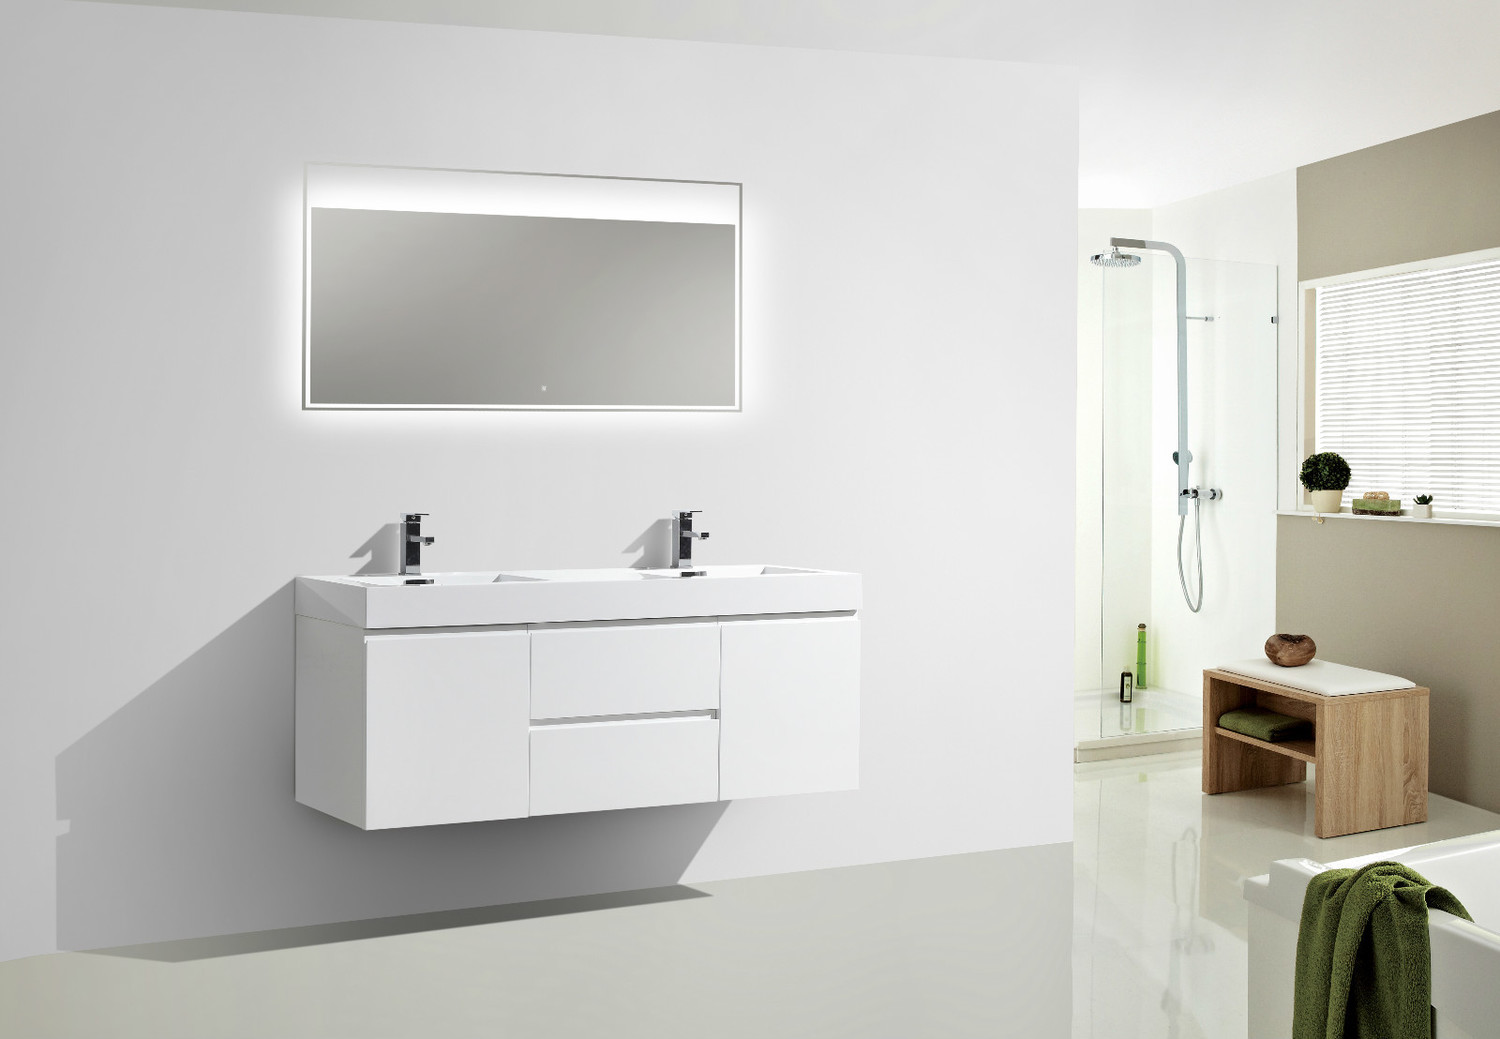 bathroom vanity with double sink 60 Moreno Bath High Gloss White Rich Finish